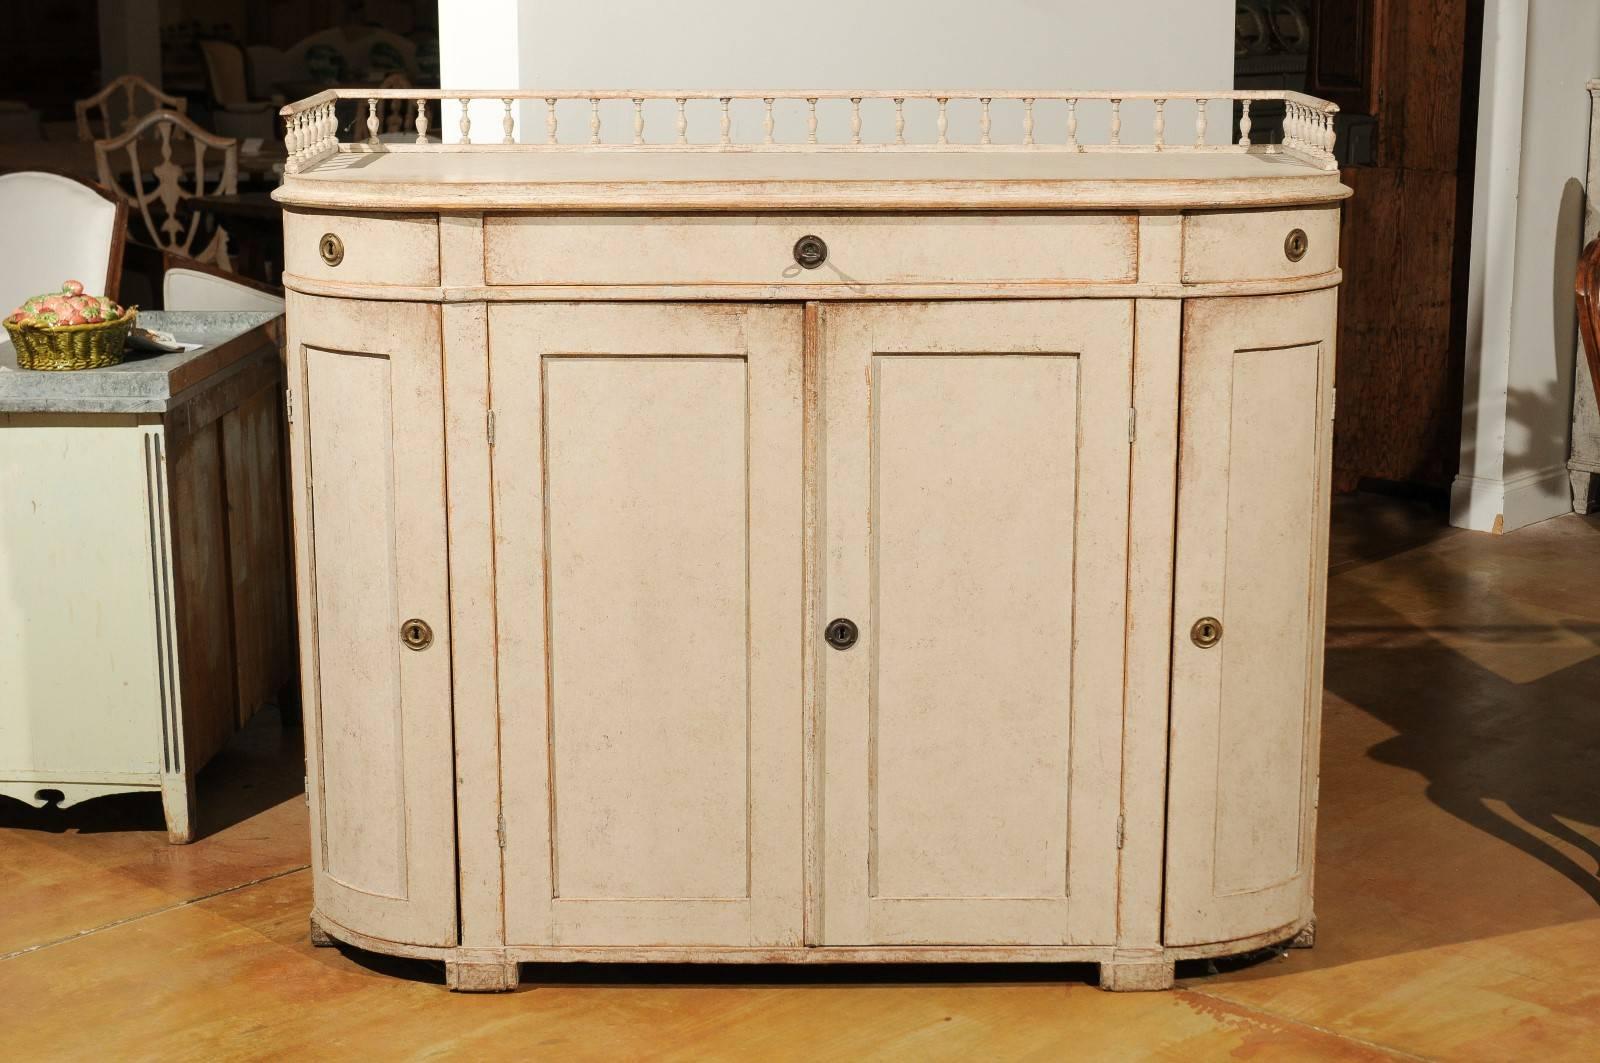 A Swedish Karl Johan style wooden painted demilune sideboard with three-quarter baluster gallery and three drawers over three doors from the late 19th century. This Swedish sideboard or demilune cabinet features a delicate balustrade gallery on the